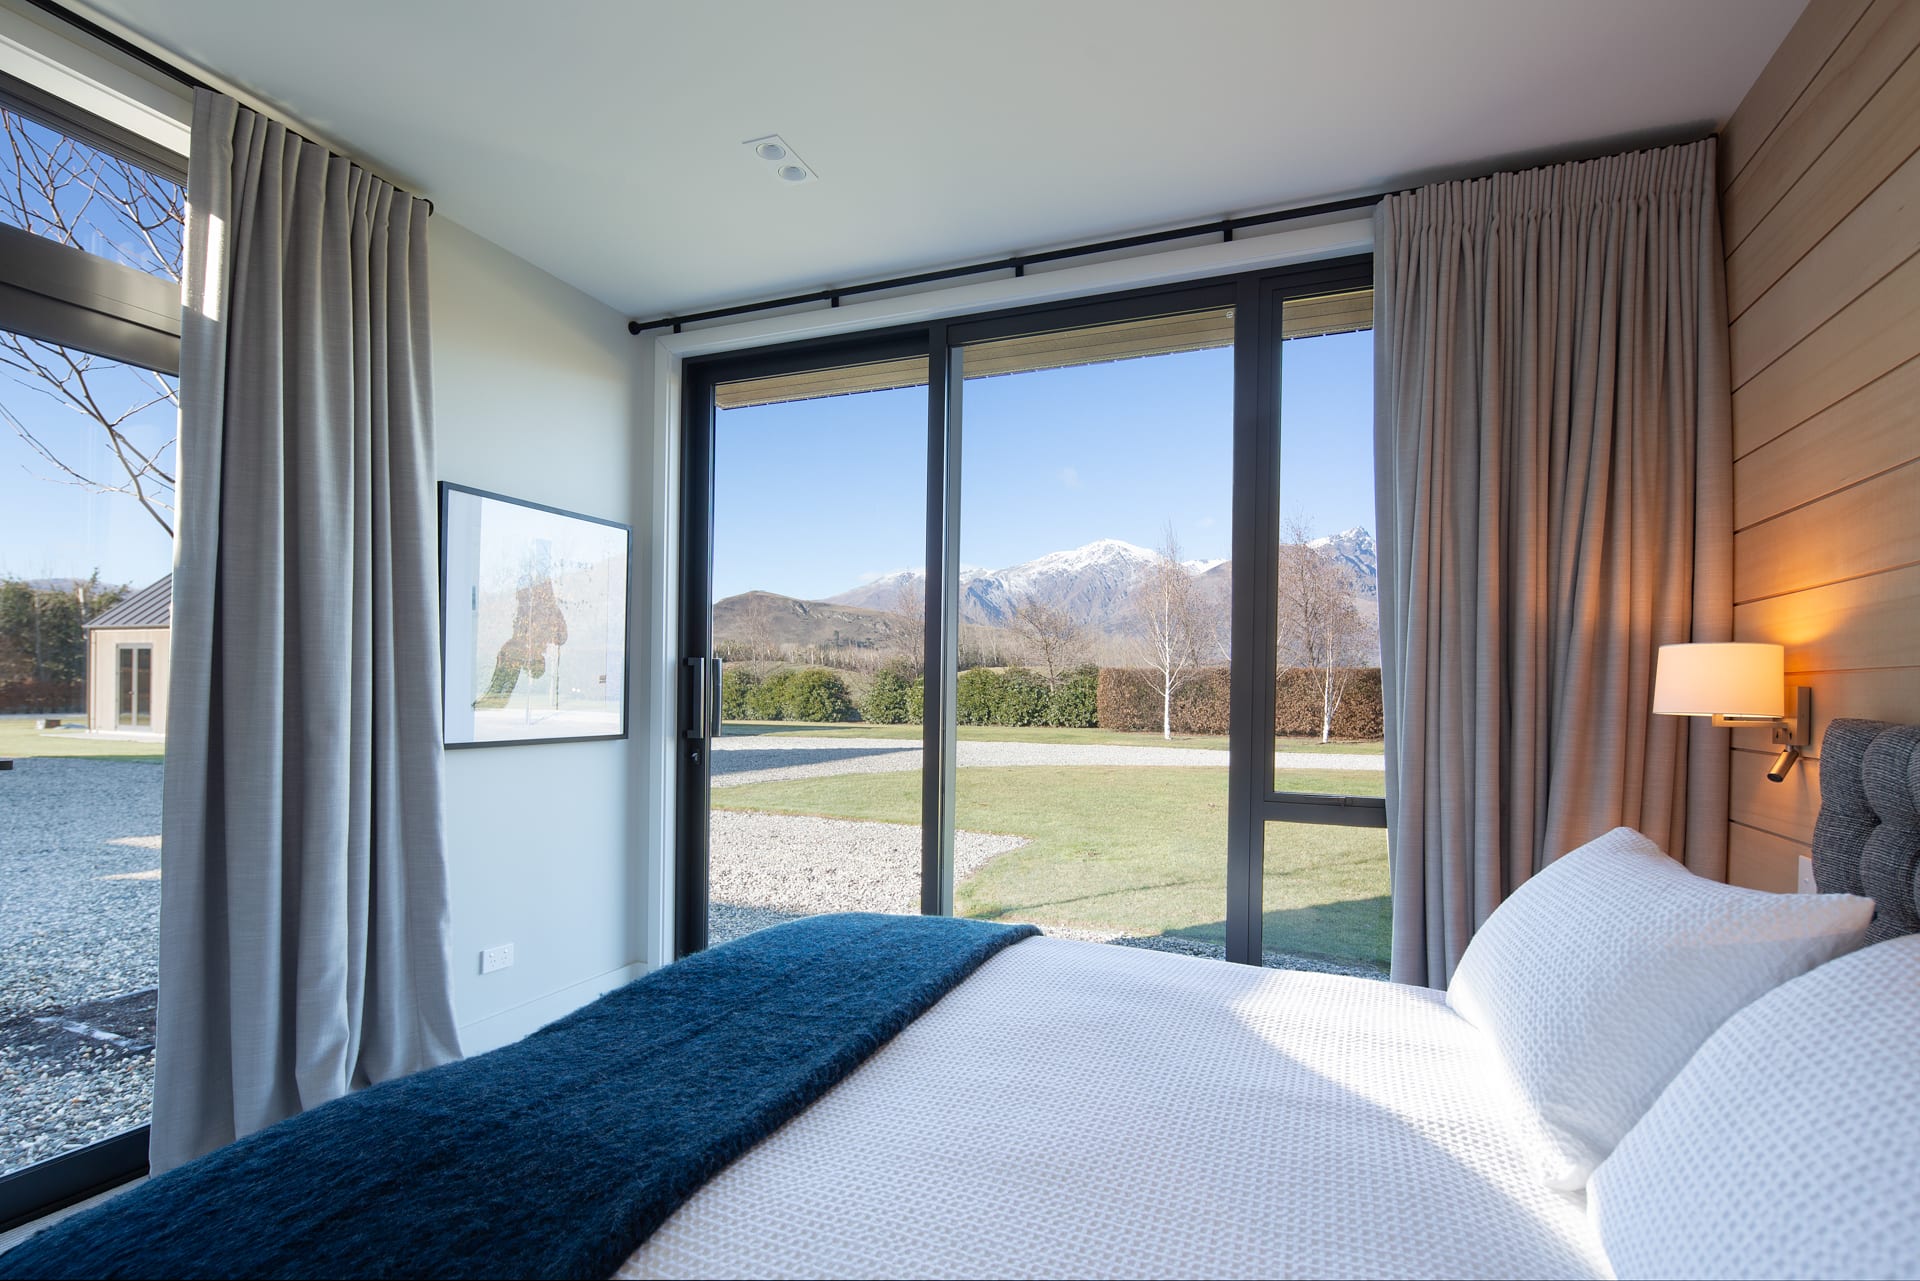 Bedroom 2 with views over the lawn and mountains